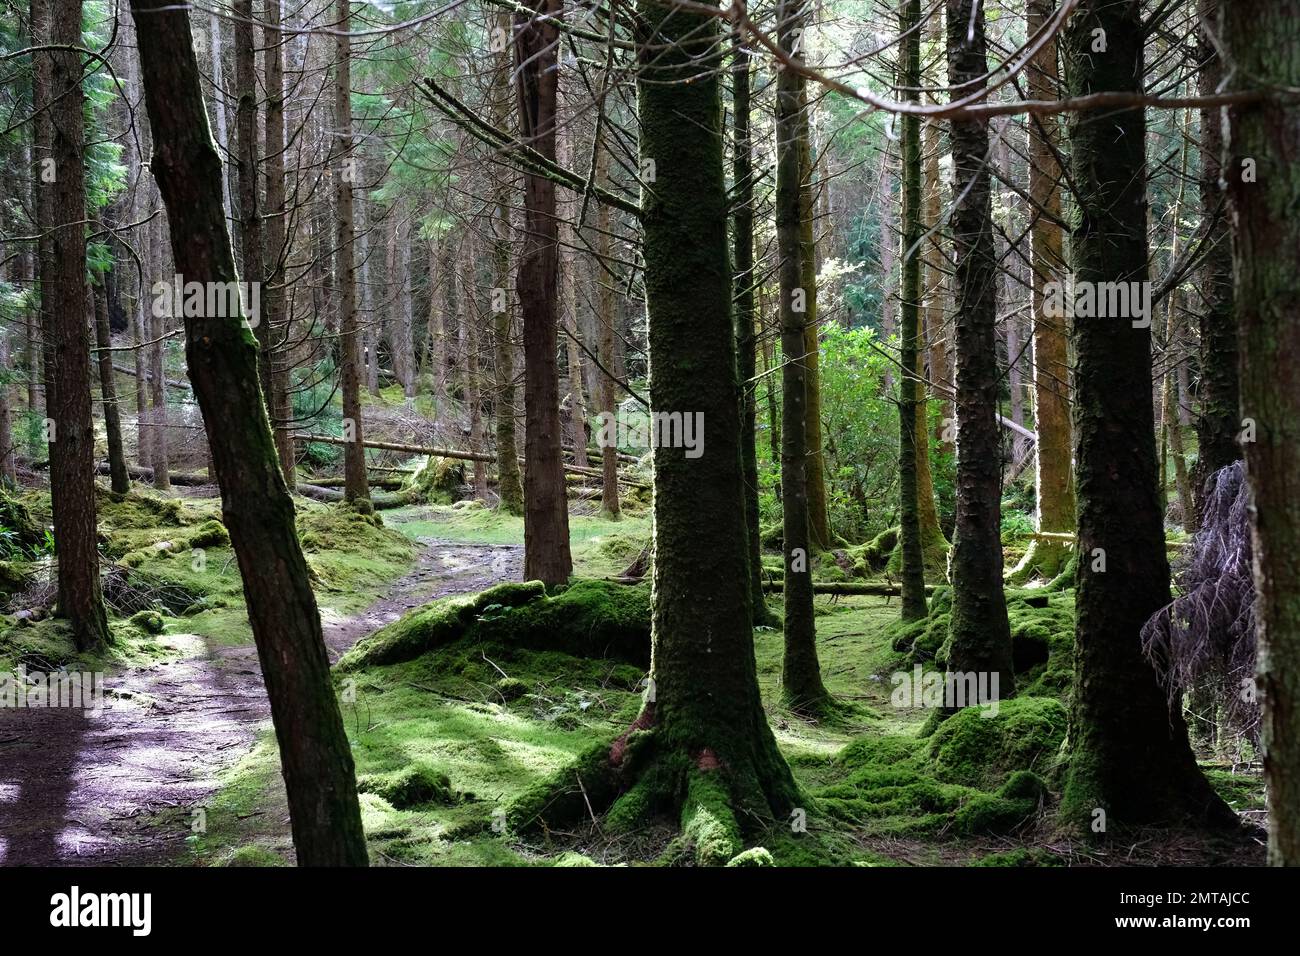 Commercial pine forest, Cashelkeelty, County Kerry, Ireland - John Gollop Stock Photo